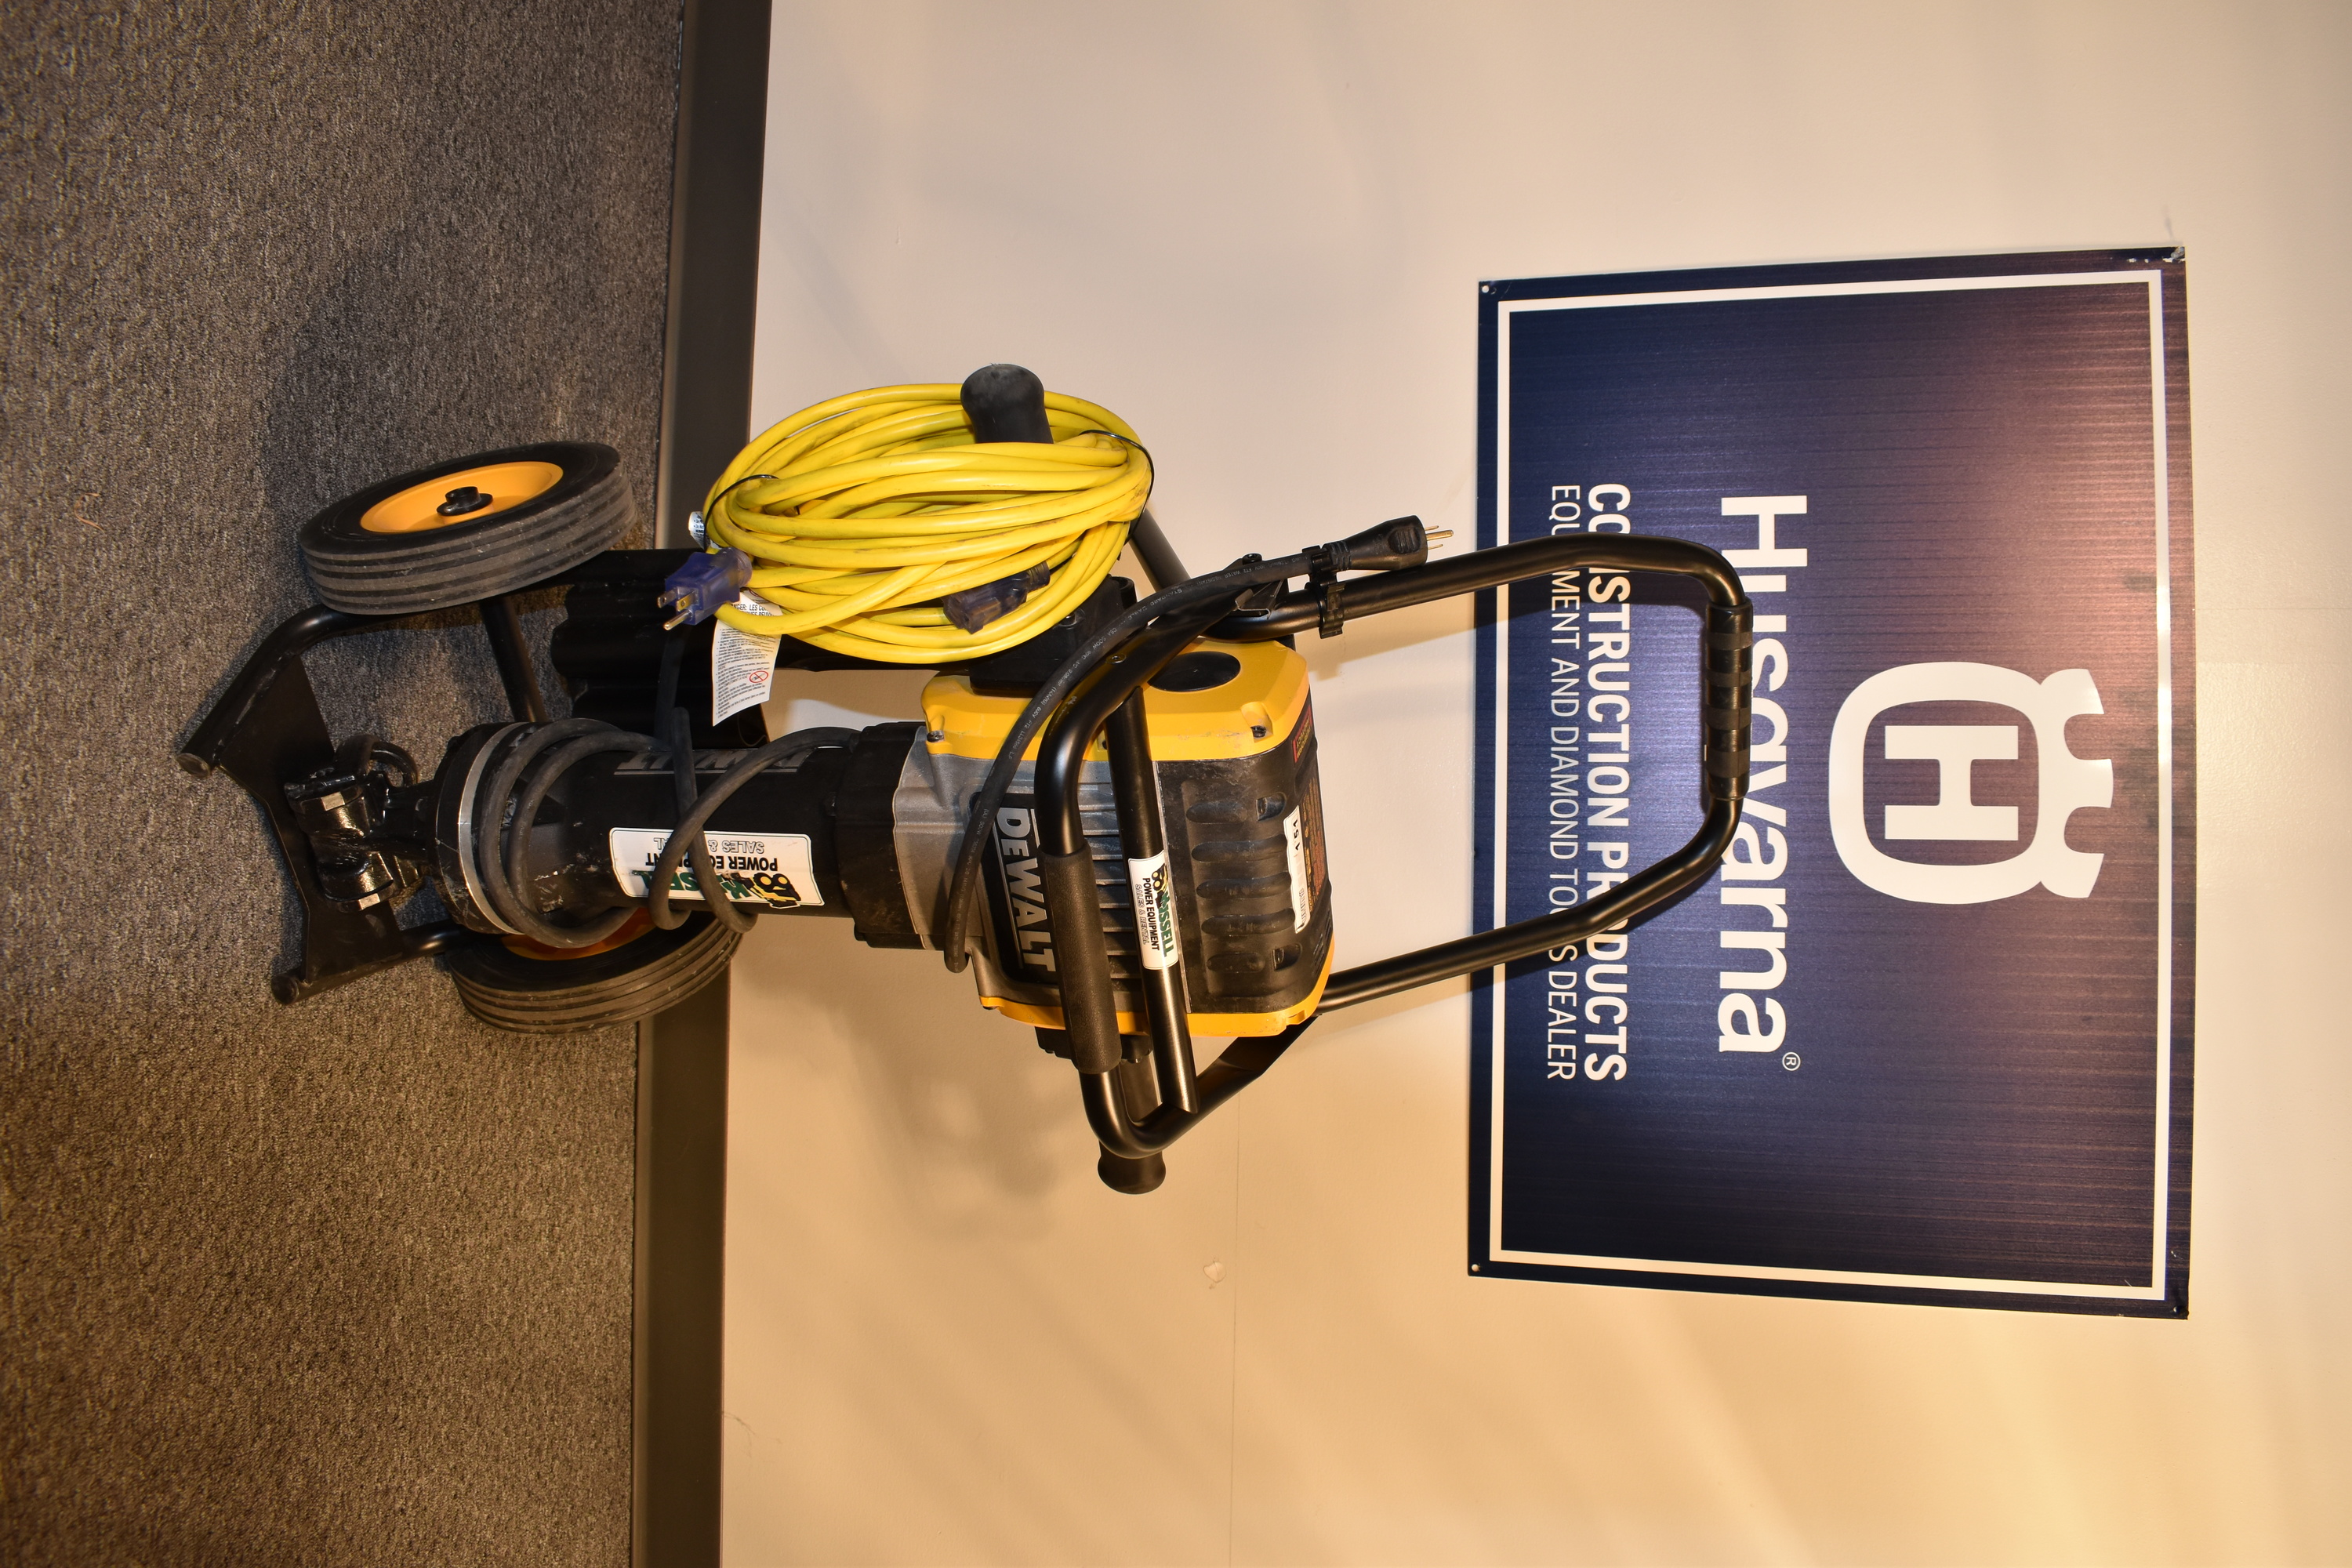 A dewalt electric jackhammer is propped upright on its stand. It has a long hammer, a large engine, and a yellow power cord wrapped around a handle. 